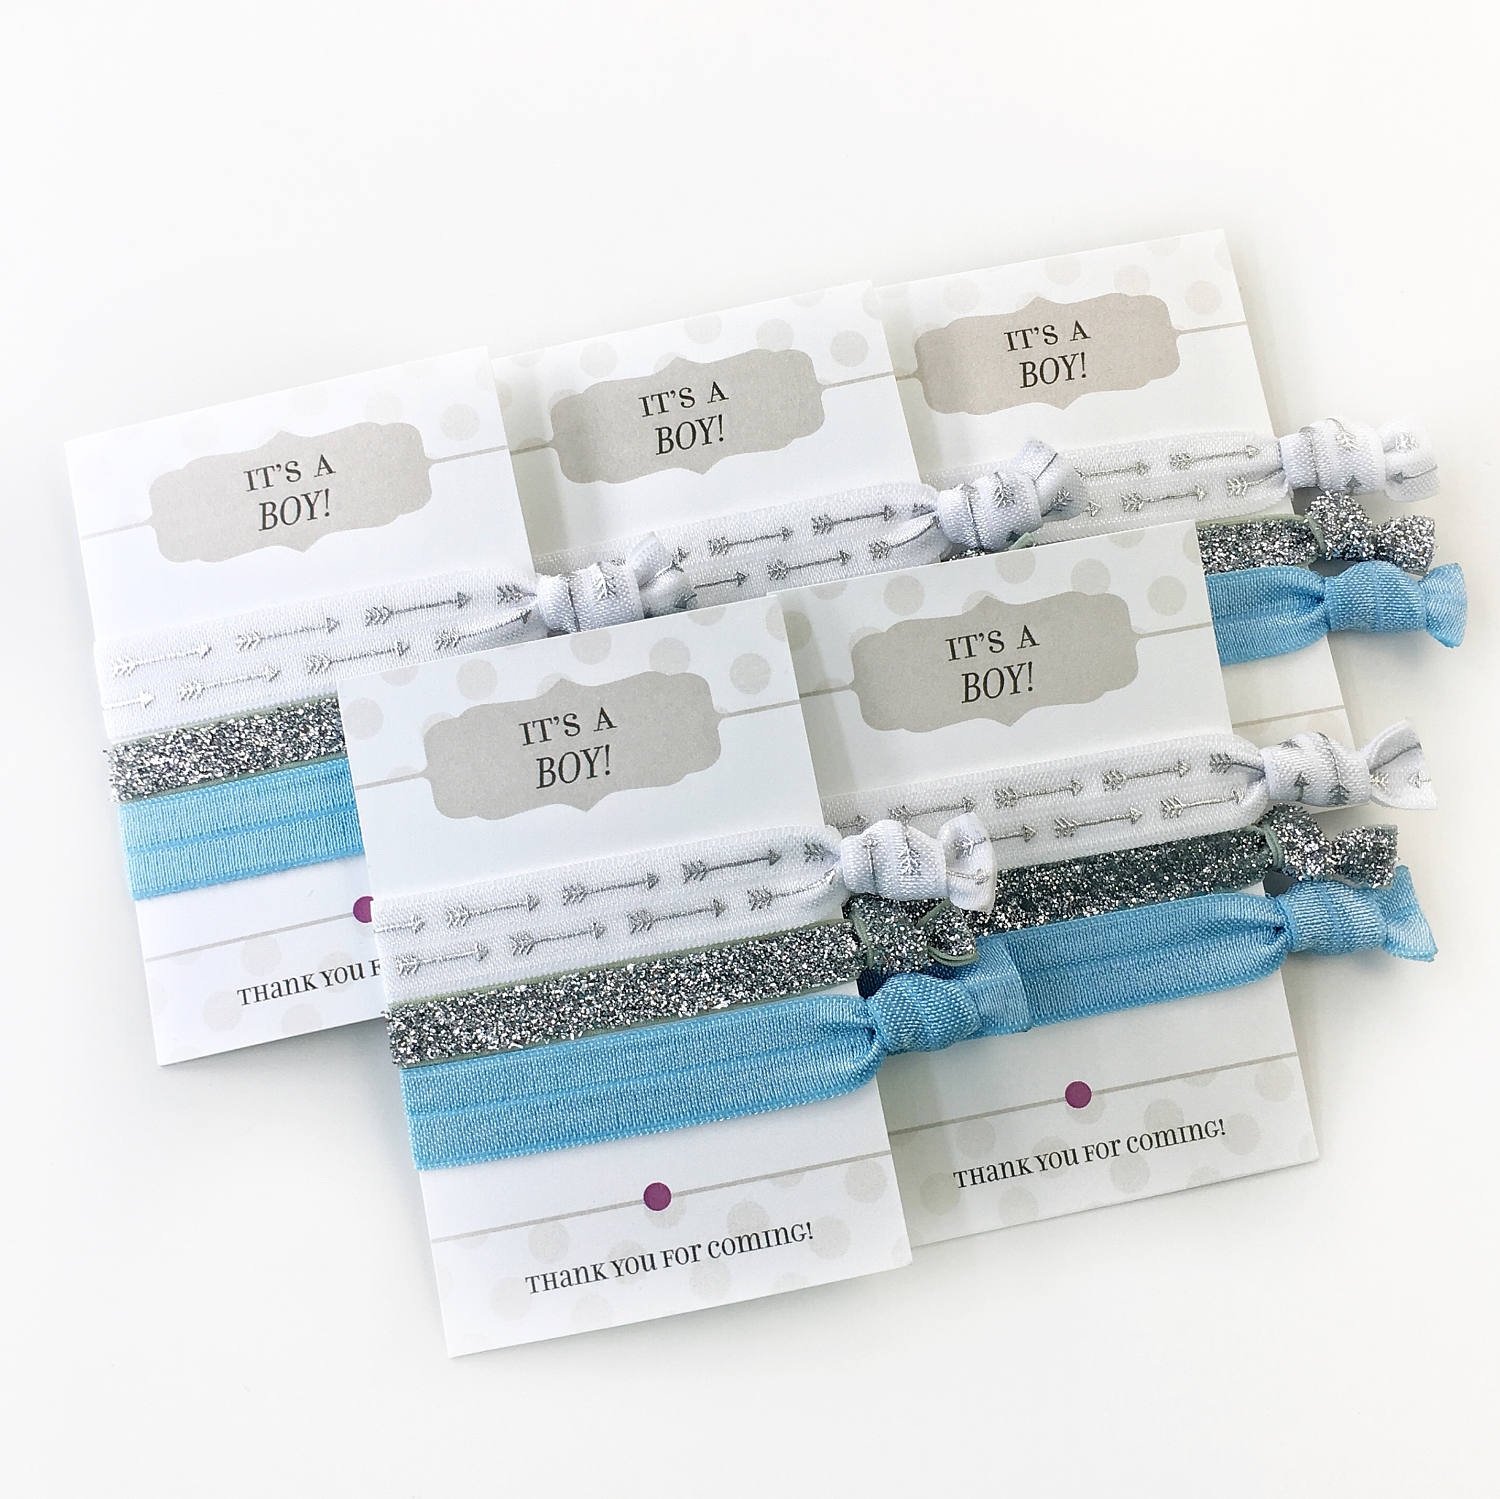 Boy Baby Shower Favors Hair Ties, Silver and Blue Baby Shower Gifts for Guests, Baby Shower Goodie Bag Fillers, Hair Tie Party Favors - @PlumPolkaDot 